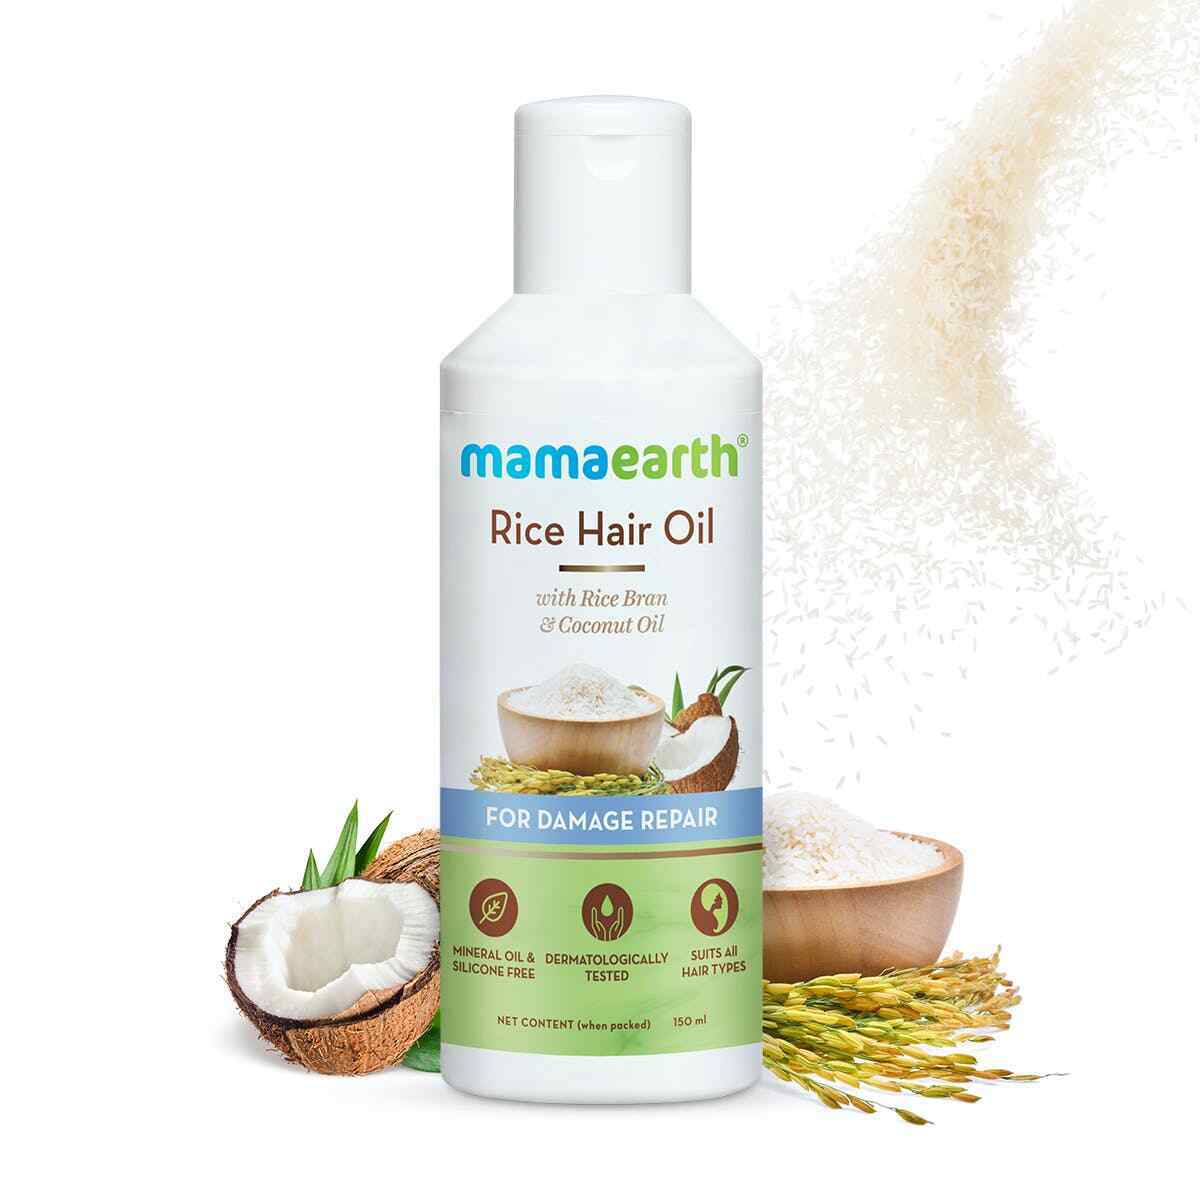 Buy Mamaearth Rice Hair Oil In Uk And Usa At Healthwithherbal 4320